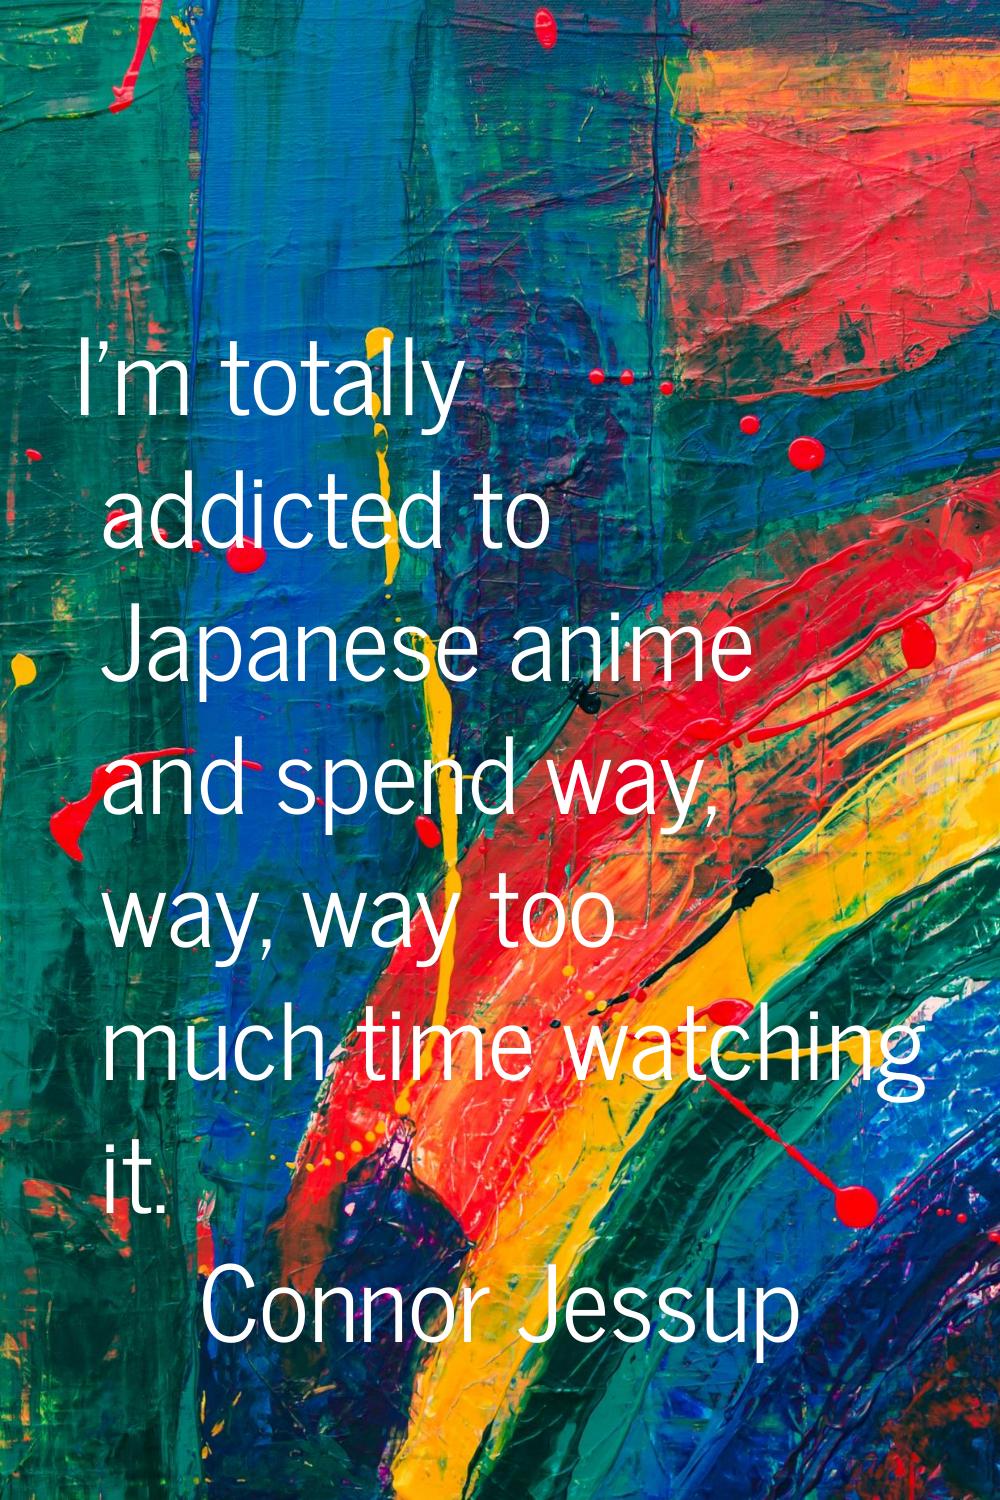 I'm totally addicted to Japanese anime and spend way, way, way too much time watching it.